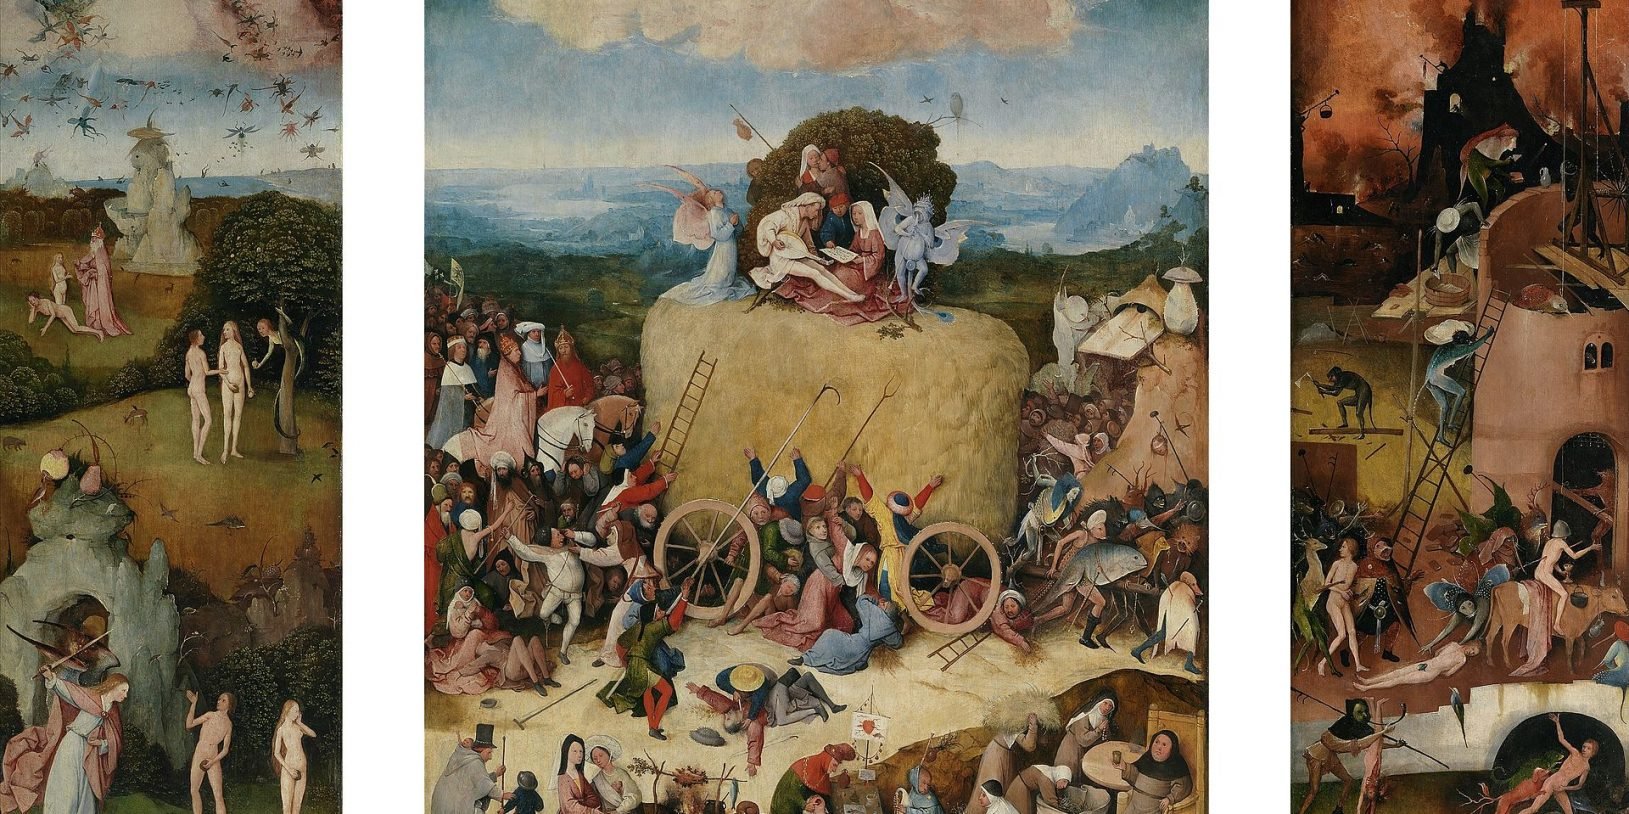 Image by Hieronymus Bosch.